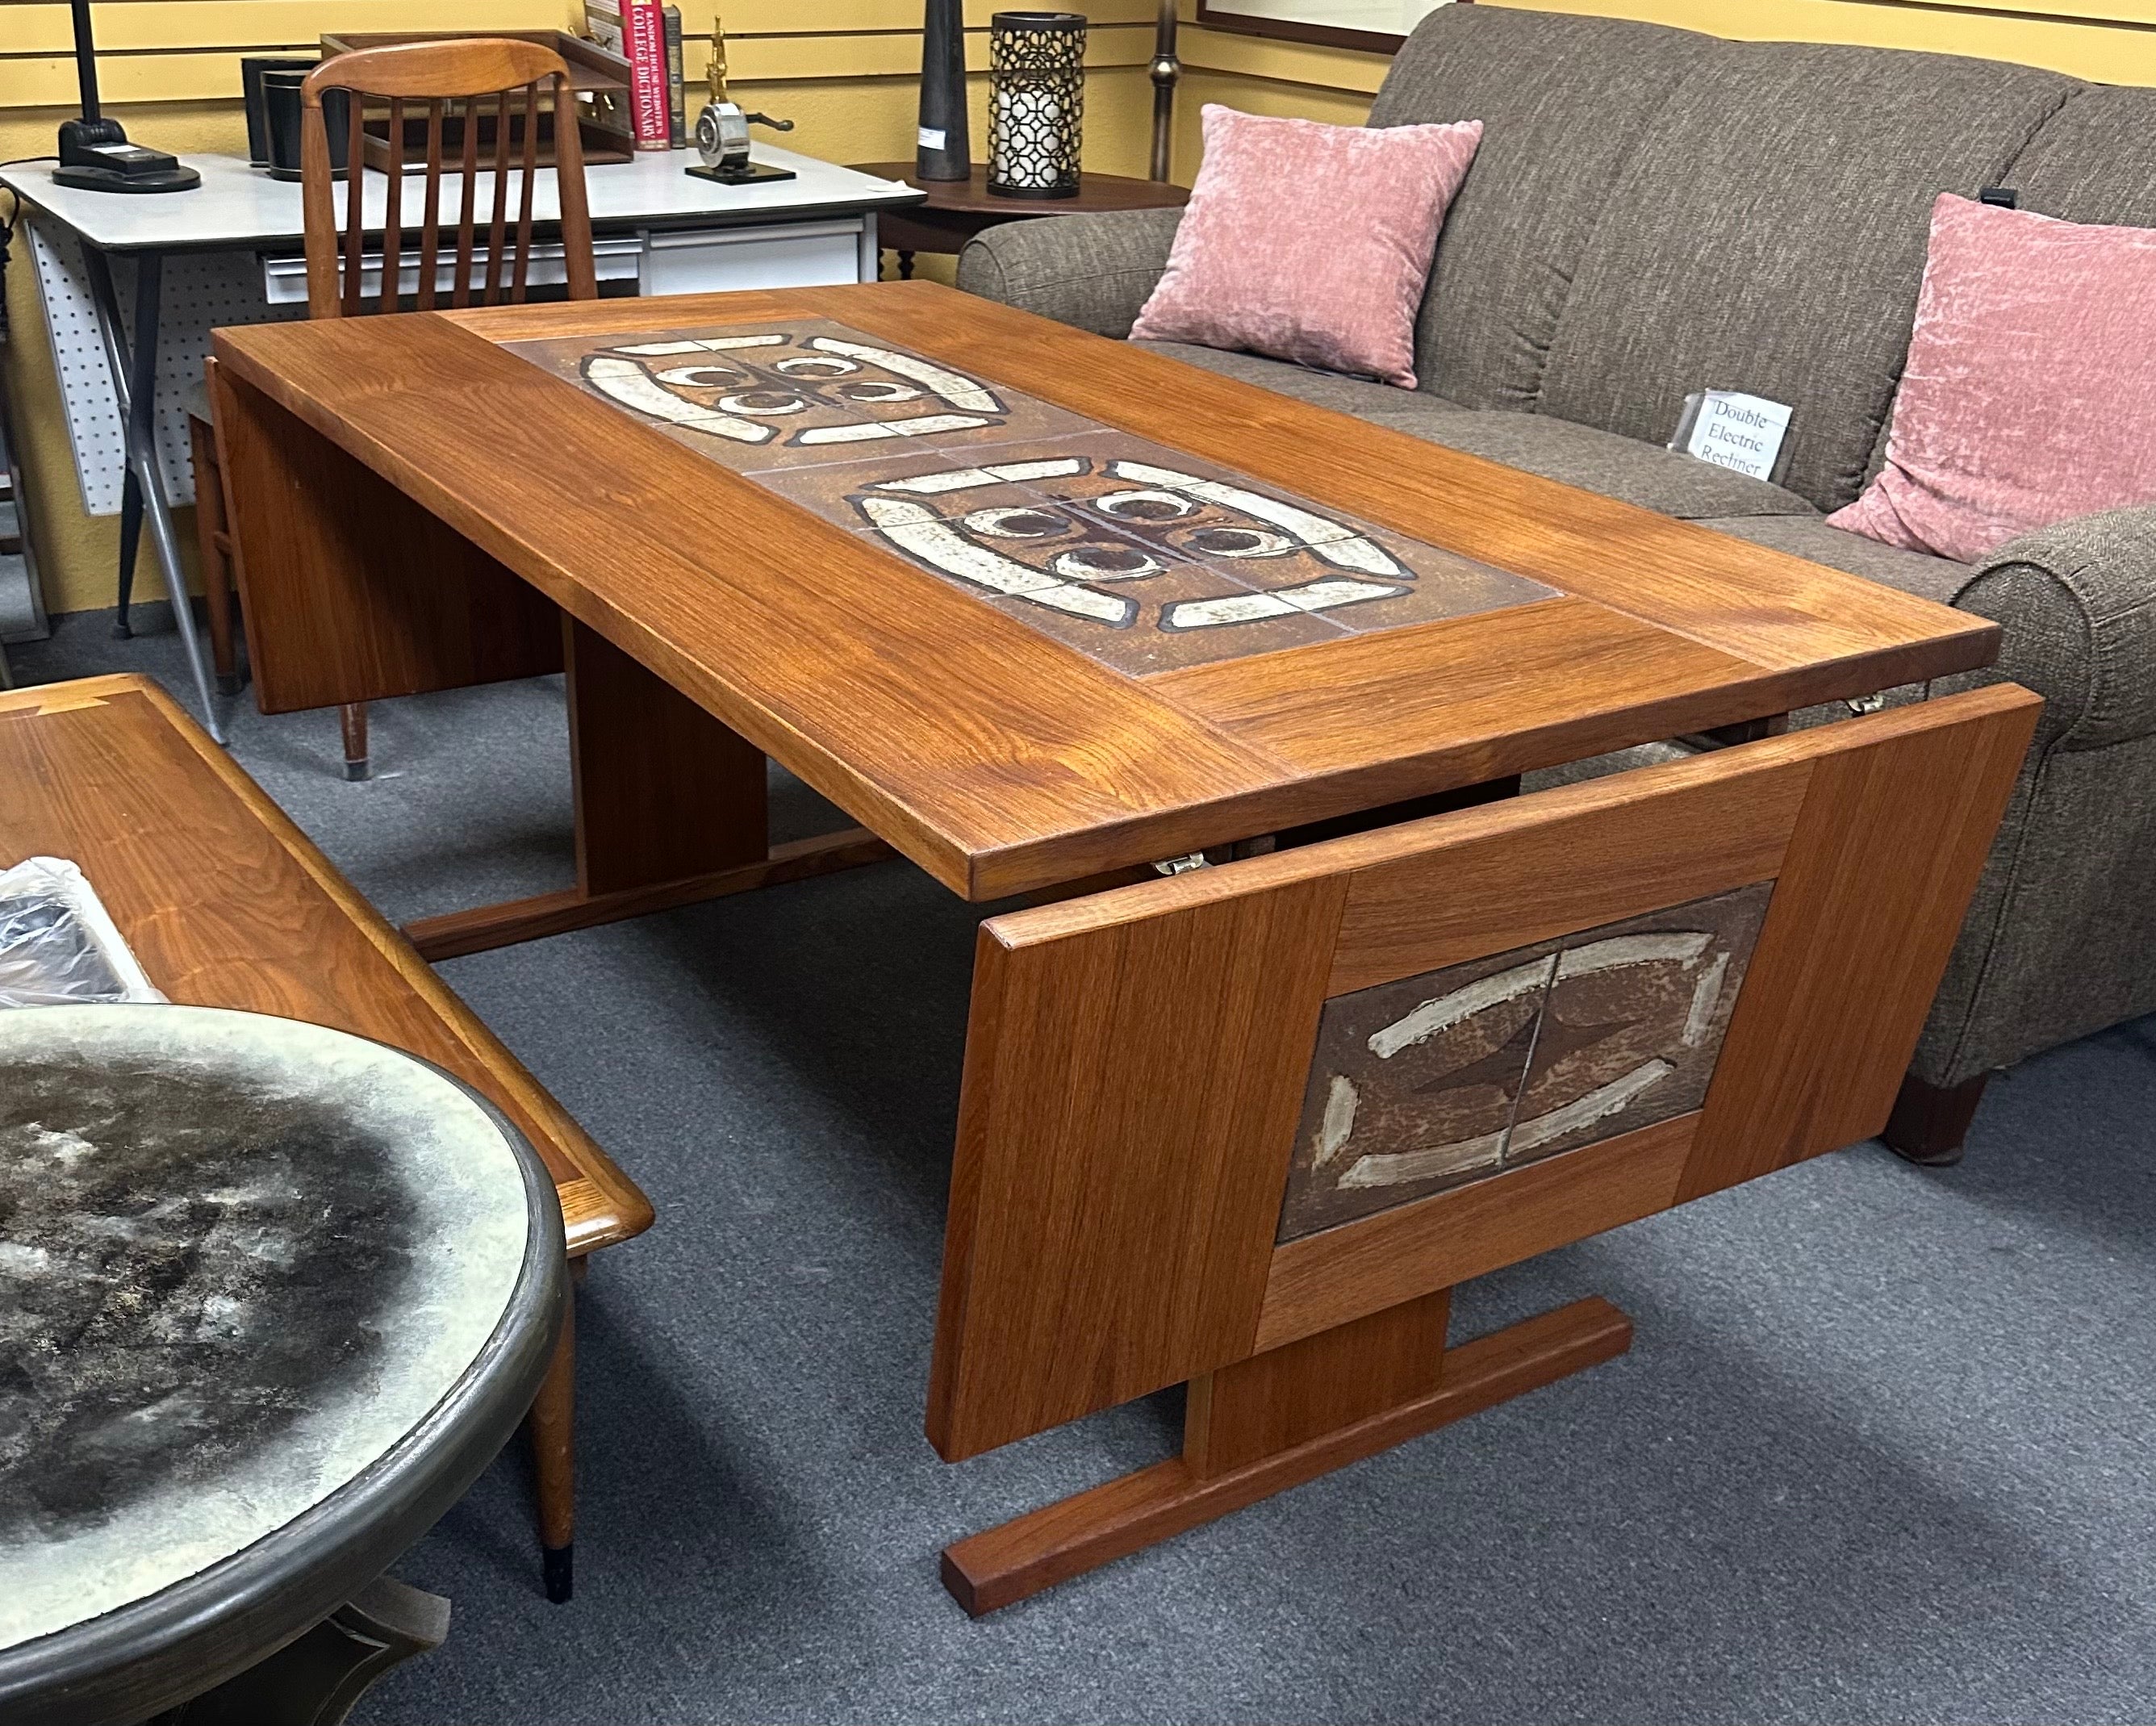 Danish Modern Teak and Mosaic Tile Drop Leaf Dining Table by Gangsø Møbler In Excellent Condition For Sale In San Diego, CA